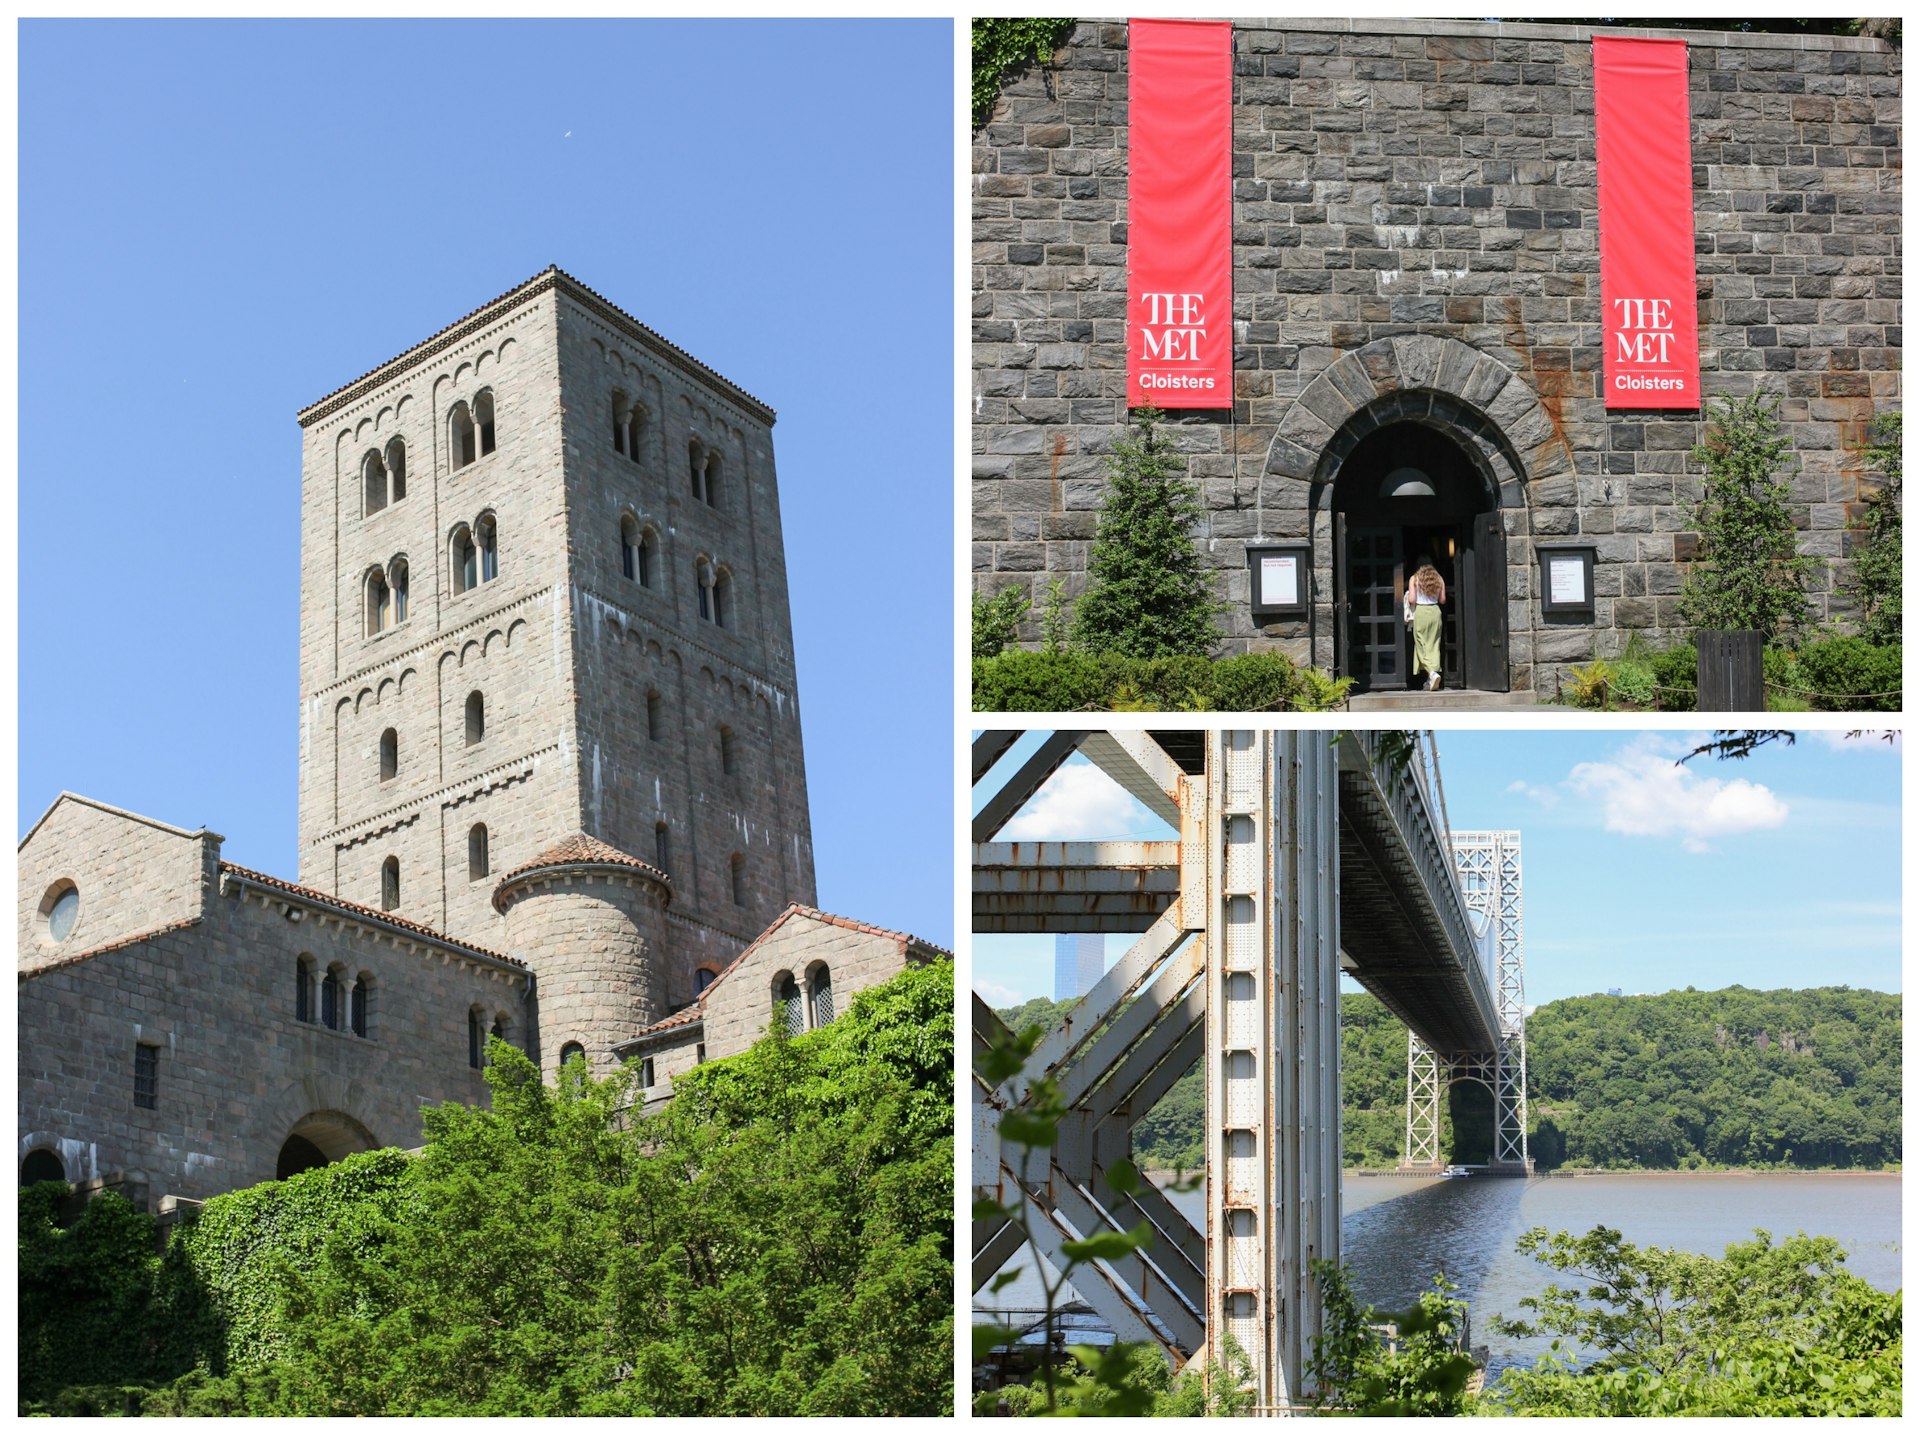 Collage; Left: A tower of the Met Cloisters, Top right: the entrance to the Met Cloisters, Bottom right: The George Washington Bridge over the Hudson River 